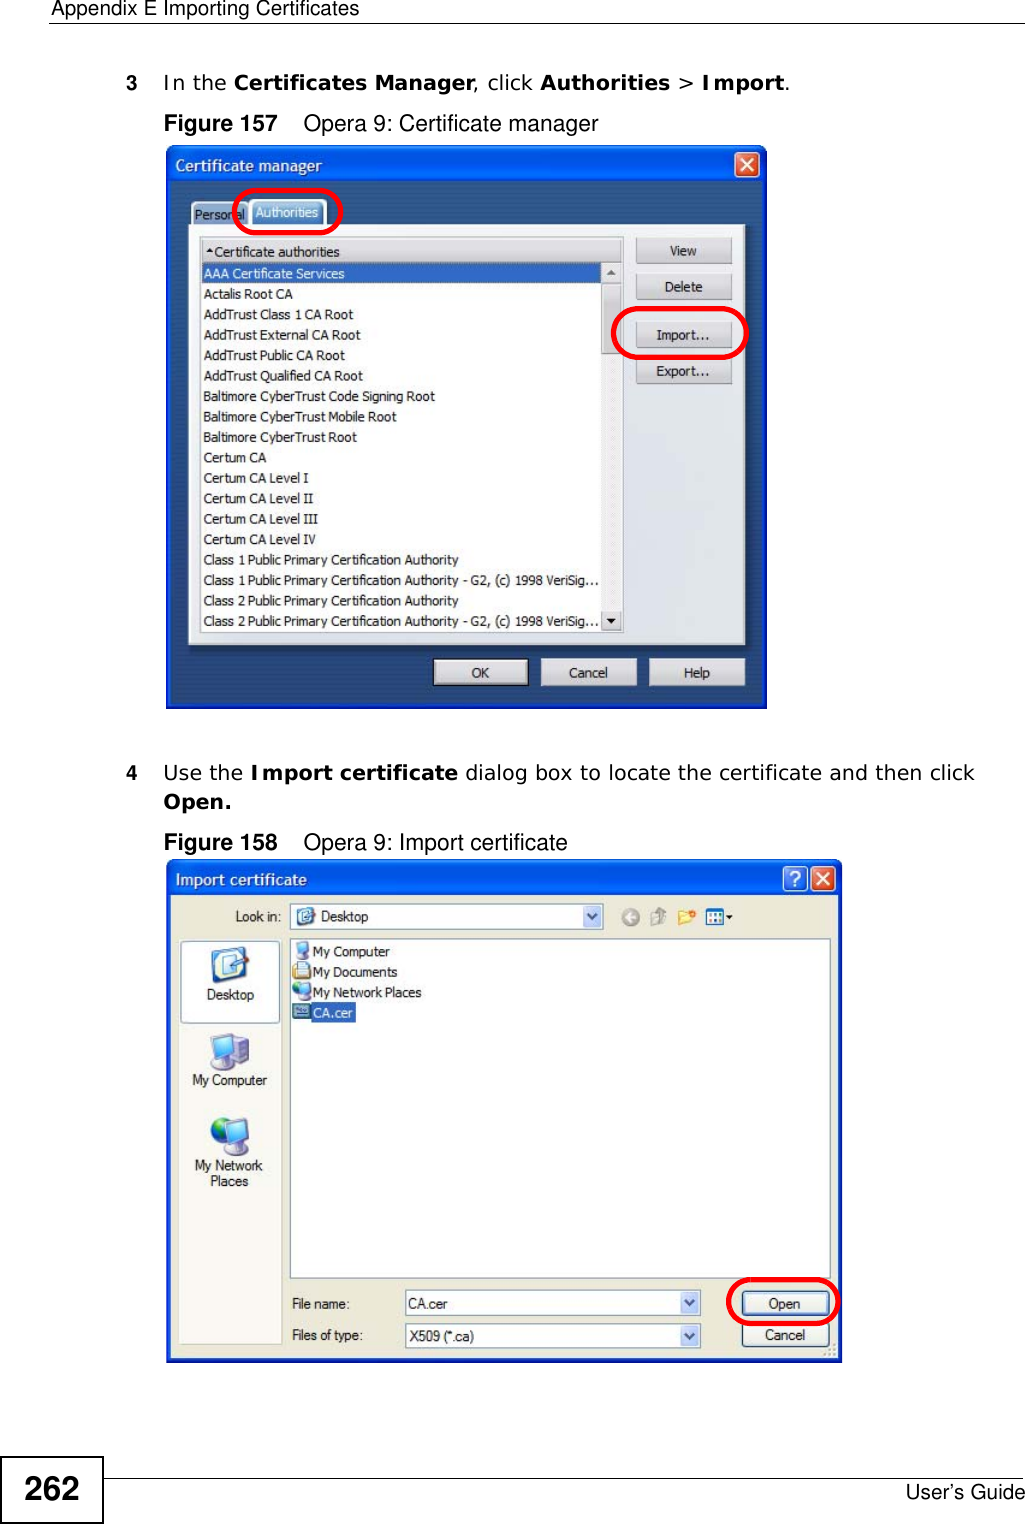 Appendix E Importing CertificatesUser’s Guide2623In the Certificates Manager, click Authorities &gt; Import.Figure 157    Opera 9: Certificate manager4Use the Import certificate dialog box to locate the certificate and then click Open.Figure 158    Opera 9: Import certificate